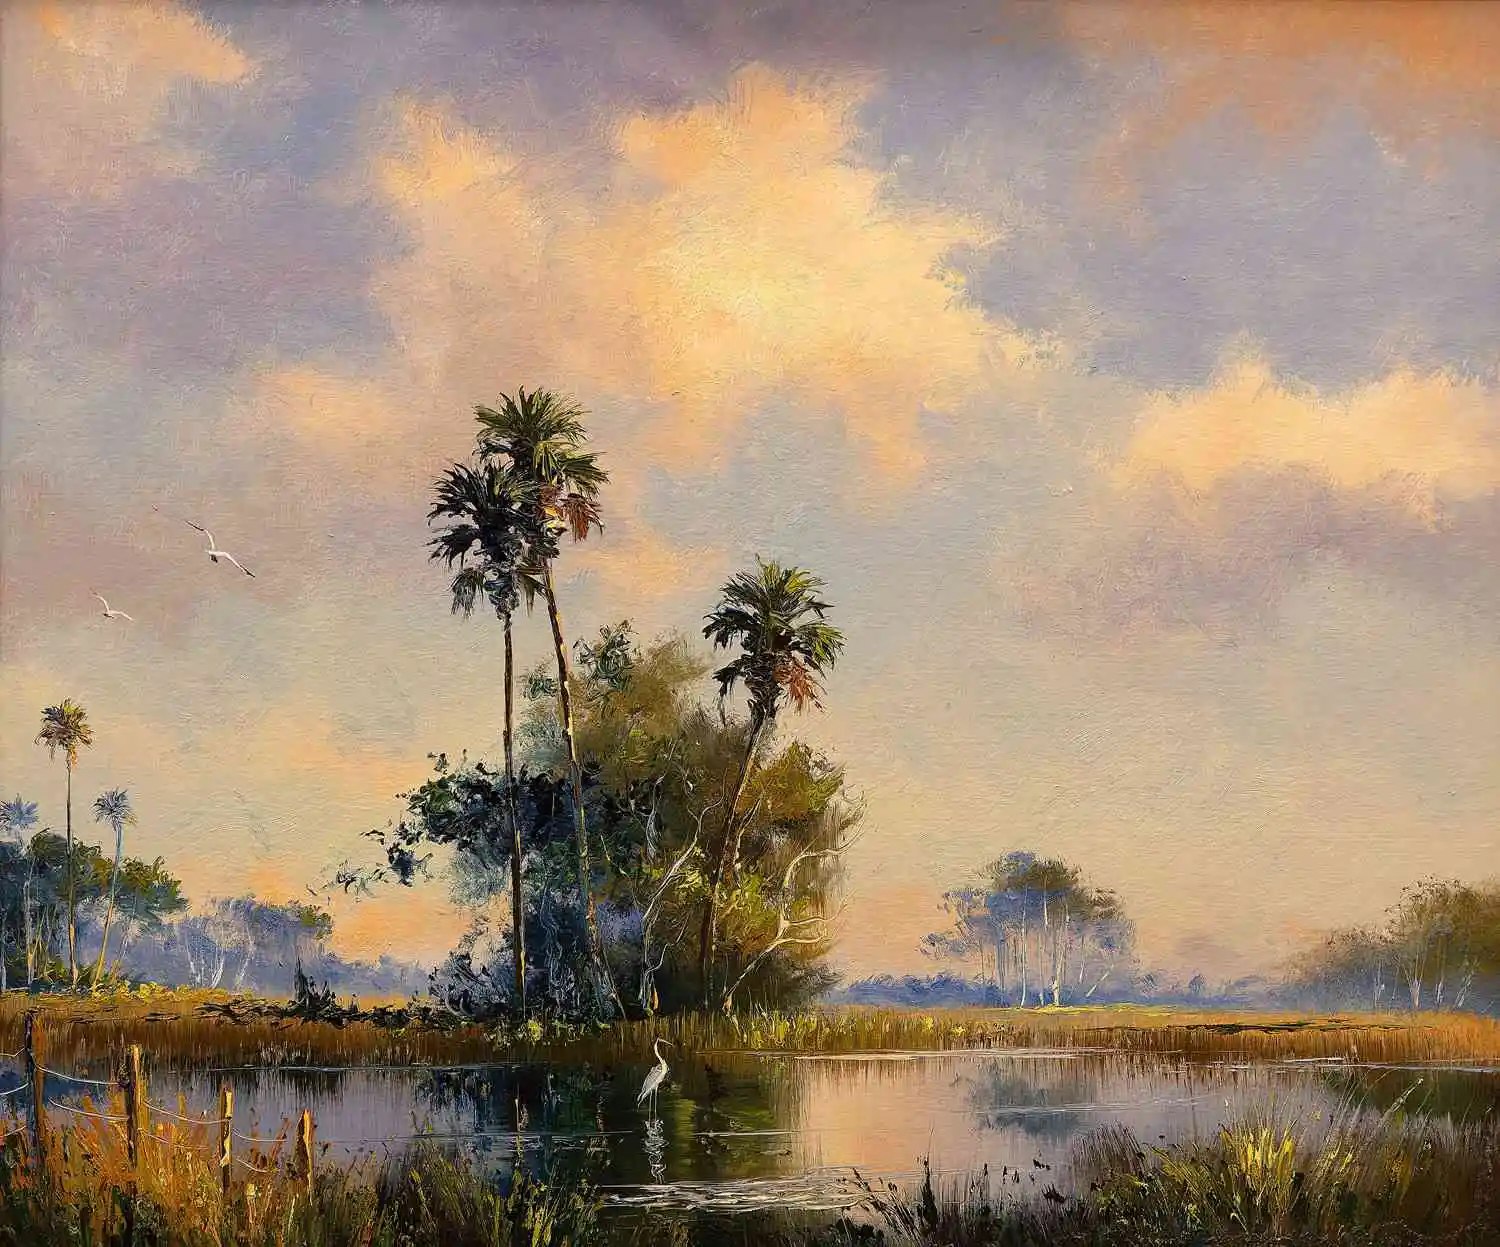 a painting of a marsh with palm trees and birds